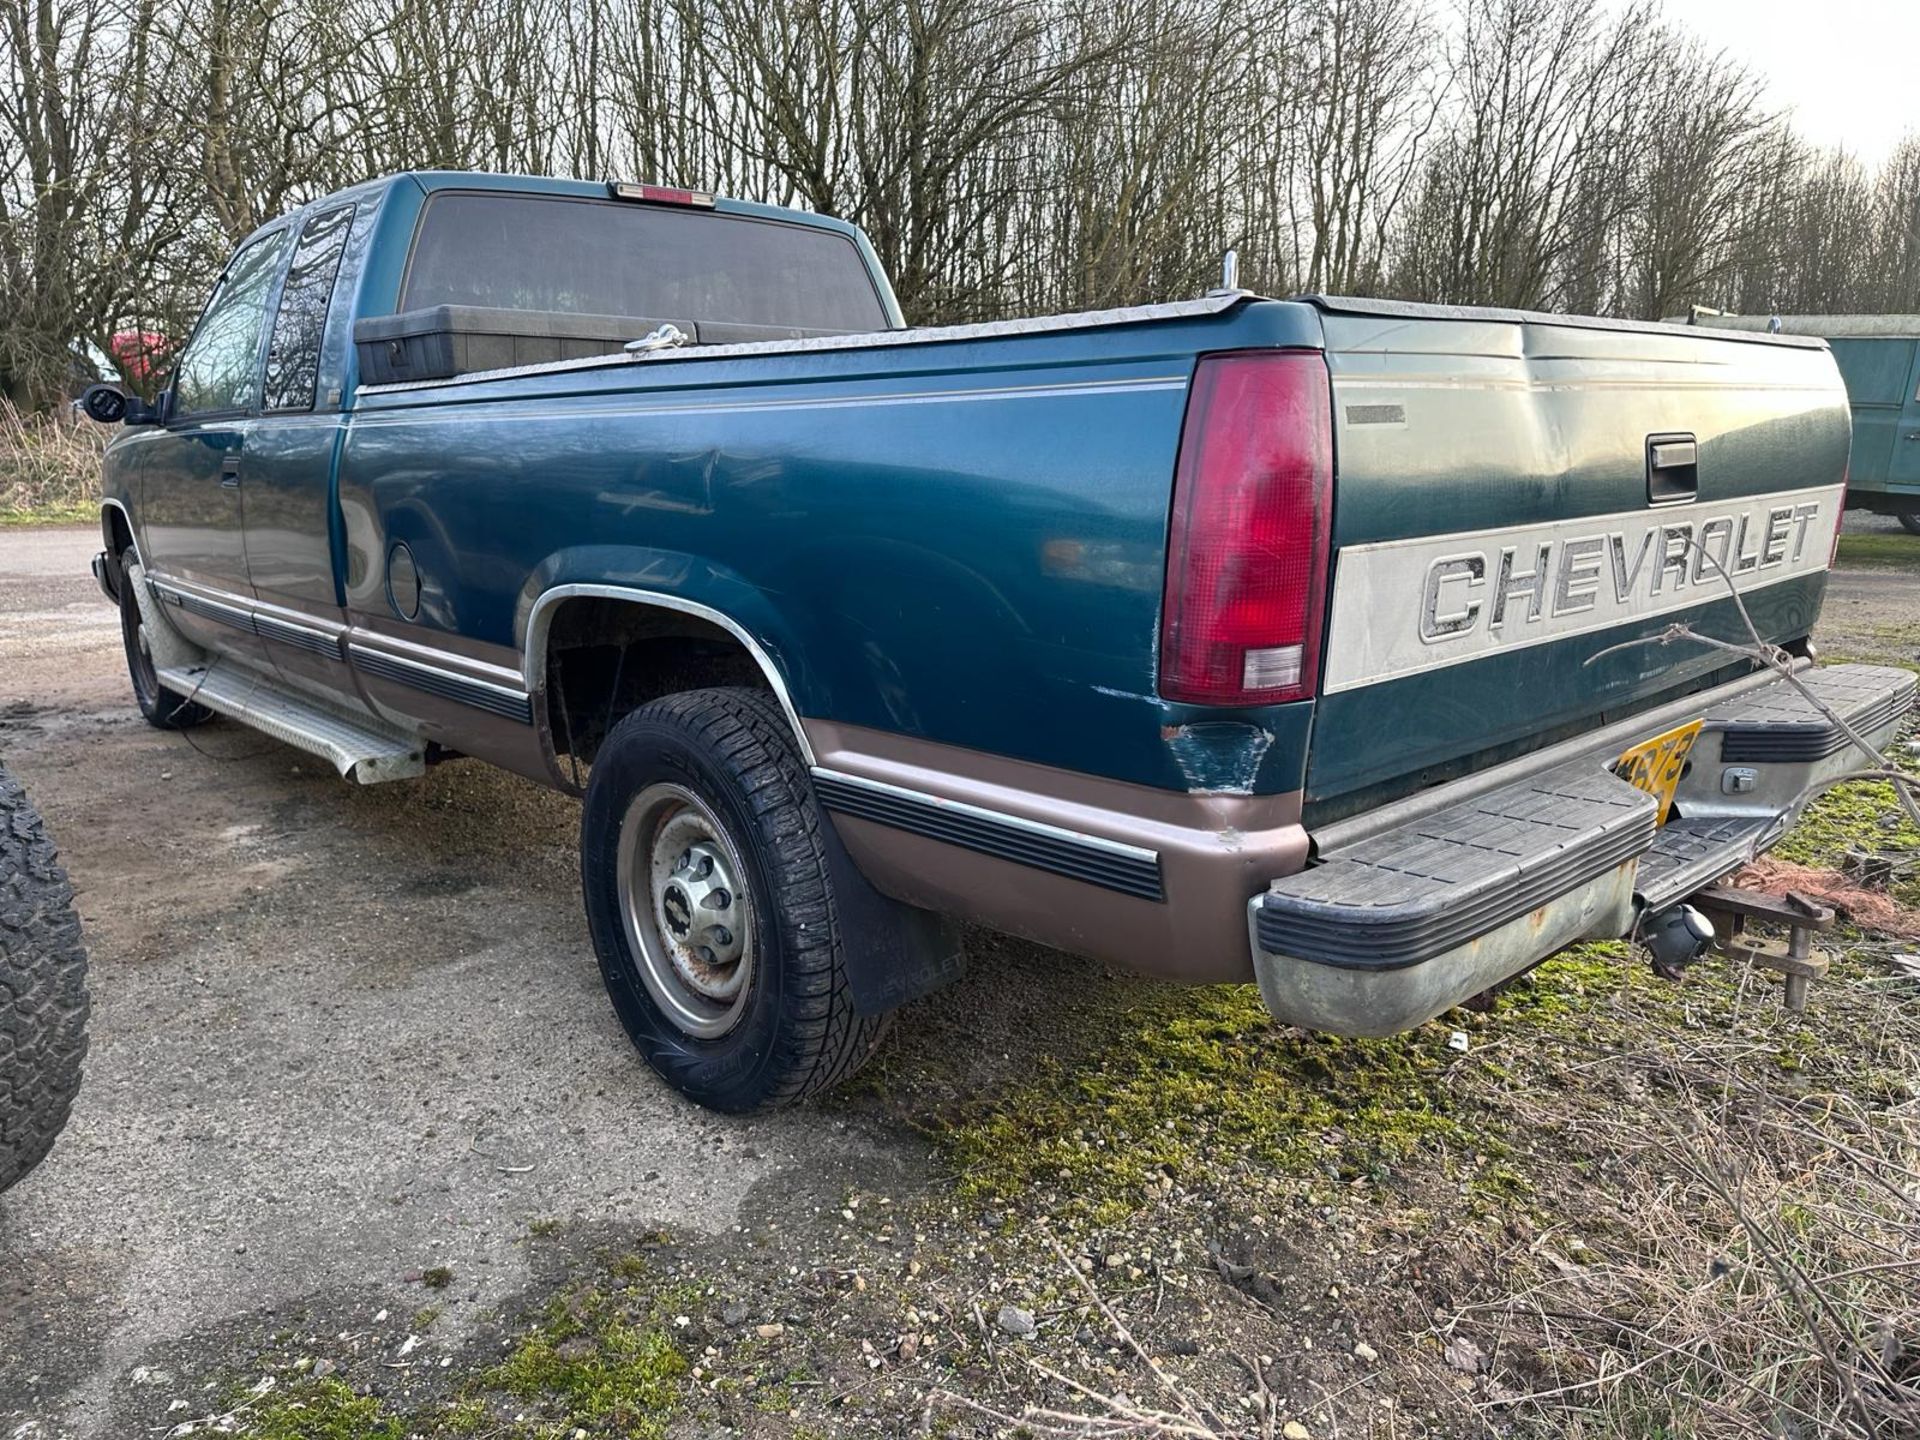 1995 CHEVROLET C2500 - 6.5 V8 TURBO DIESEL - AUTOMATIC GEARBOX - 129,646 MILES - Image 4 of 11